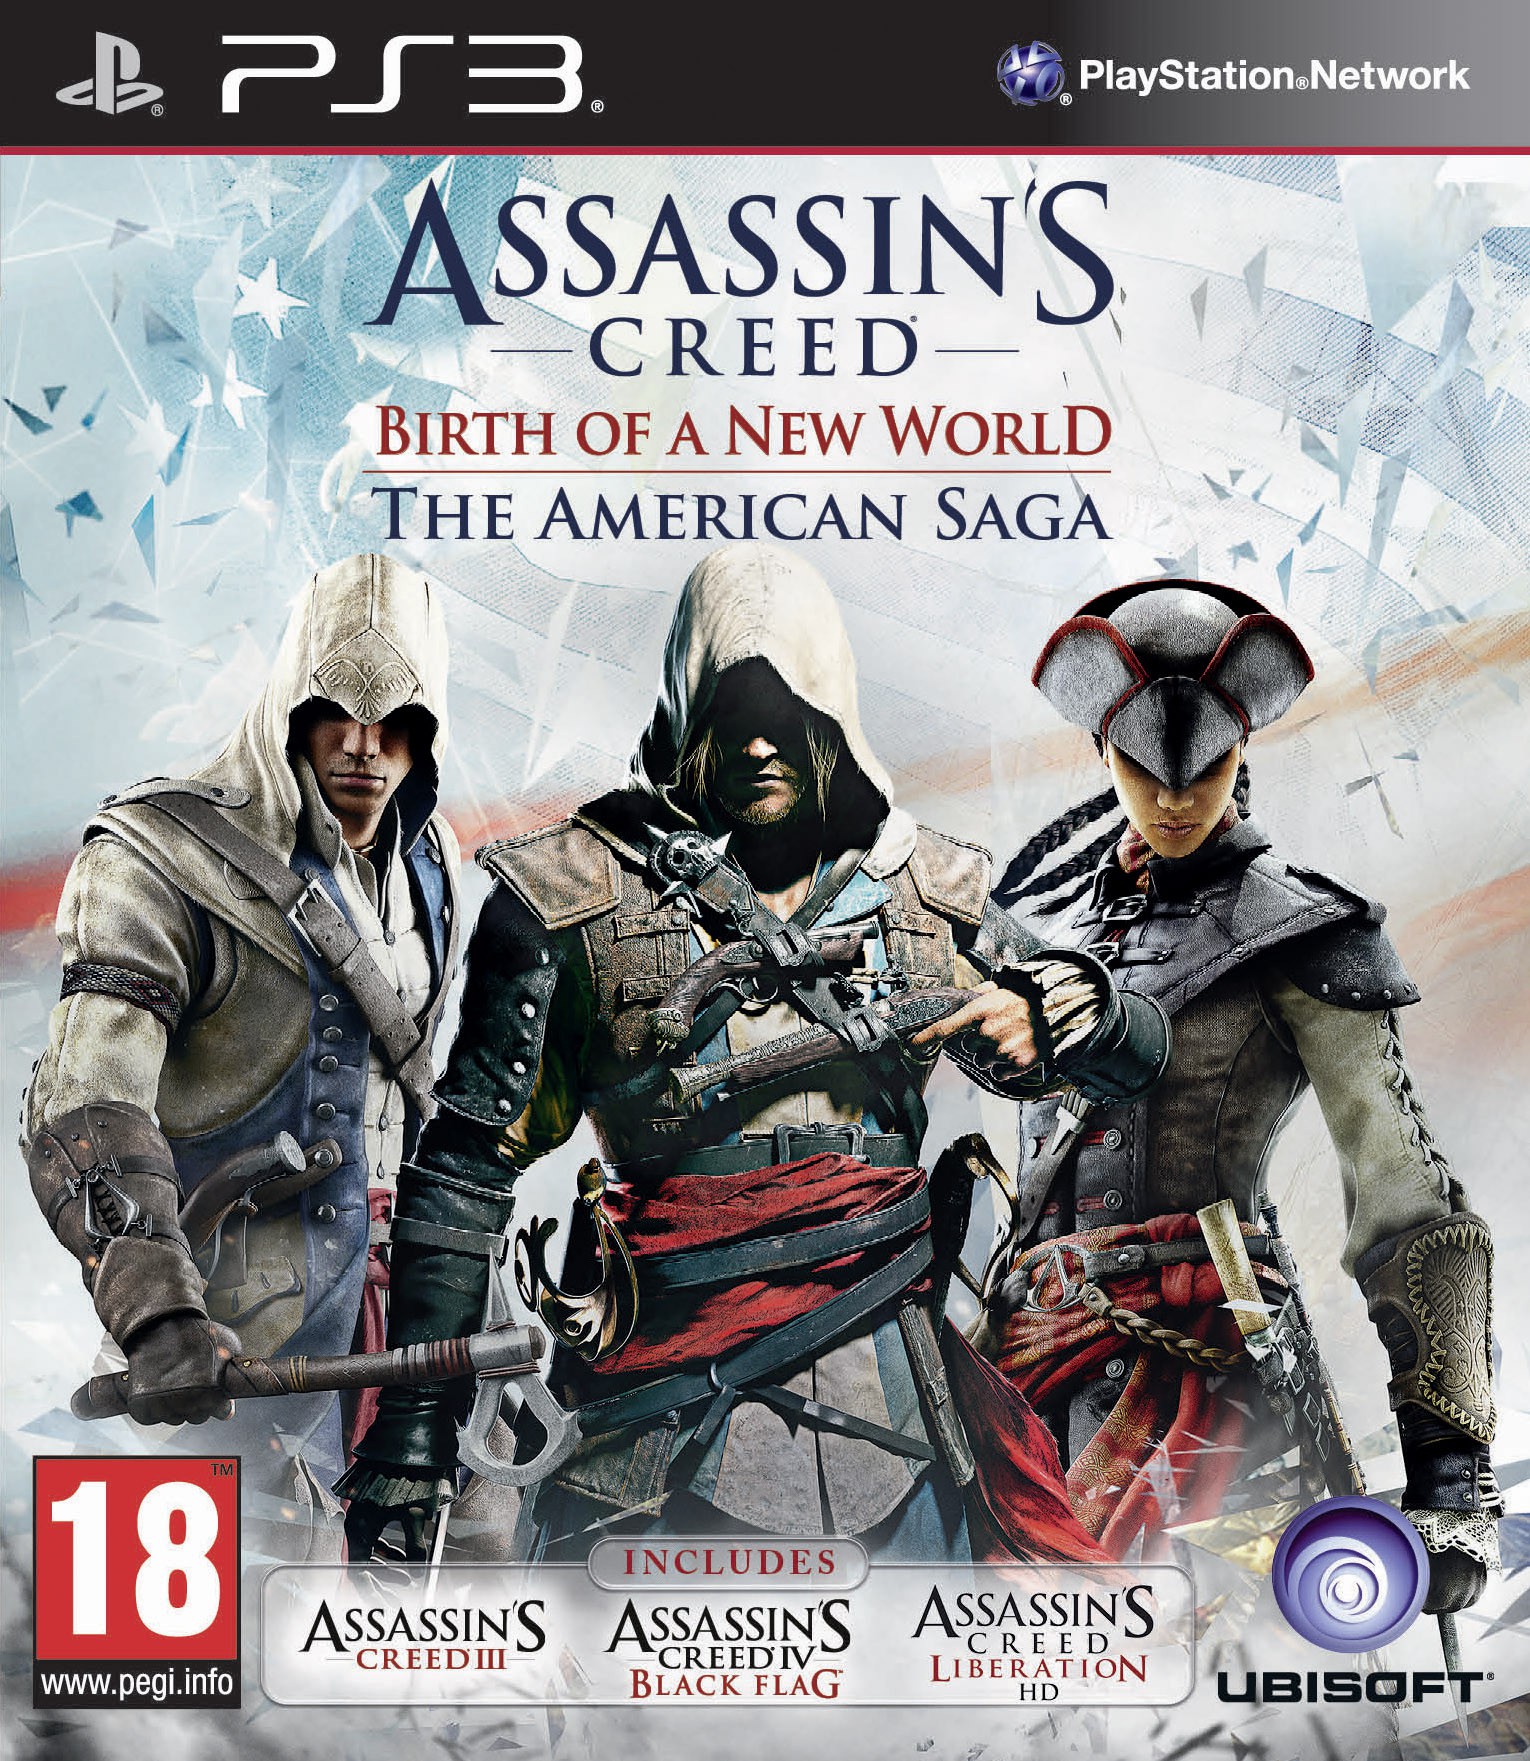 Assassin's Creed: Birth of a New World - The American Saga | levelseven